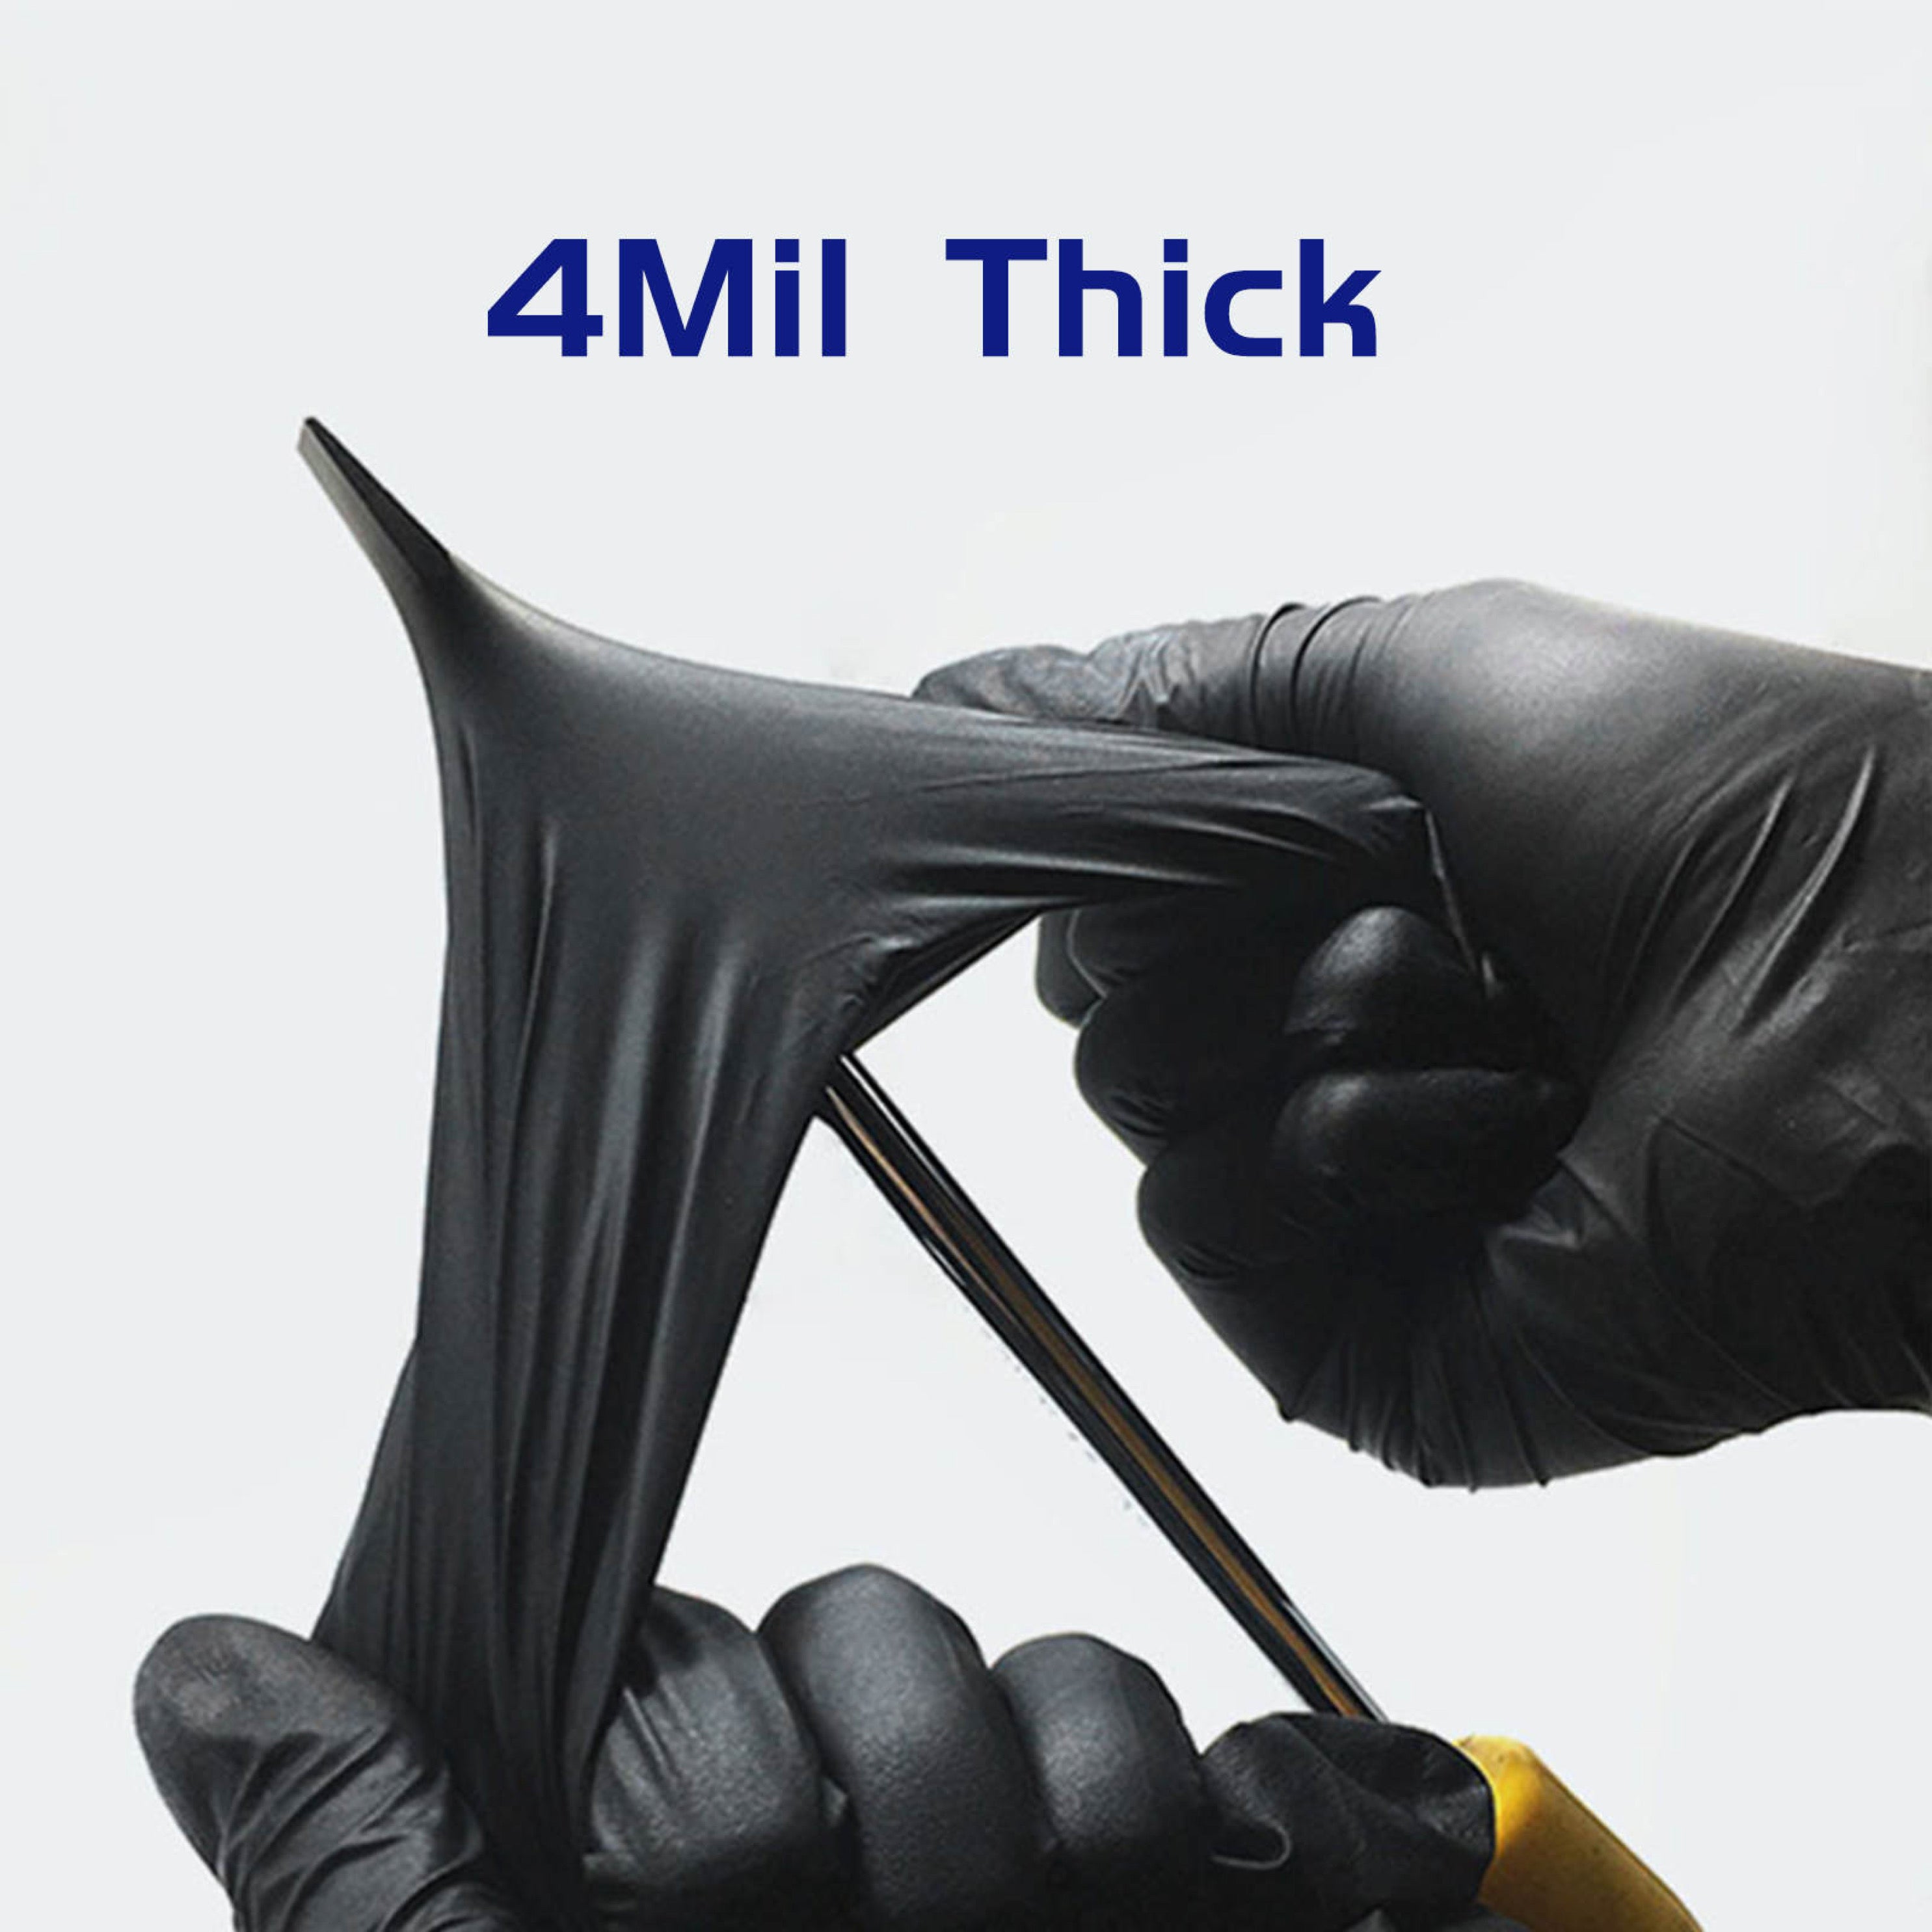 Black Nitrile Disposable Gloves, Exam Gloves, Powder-free, Latex-free, 4mil, Case of 10 Boxes